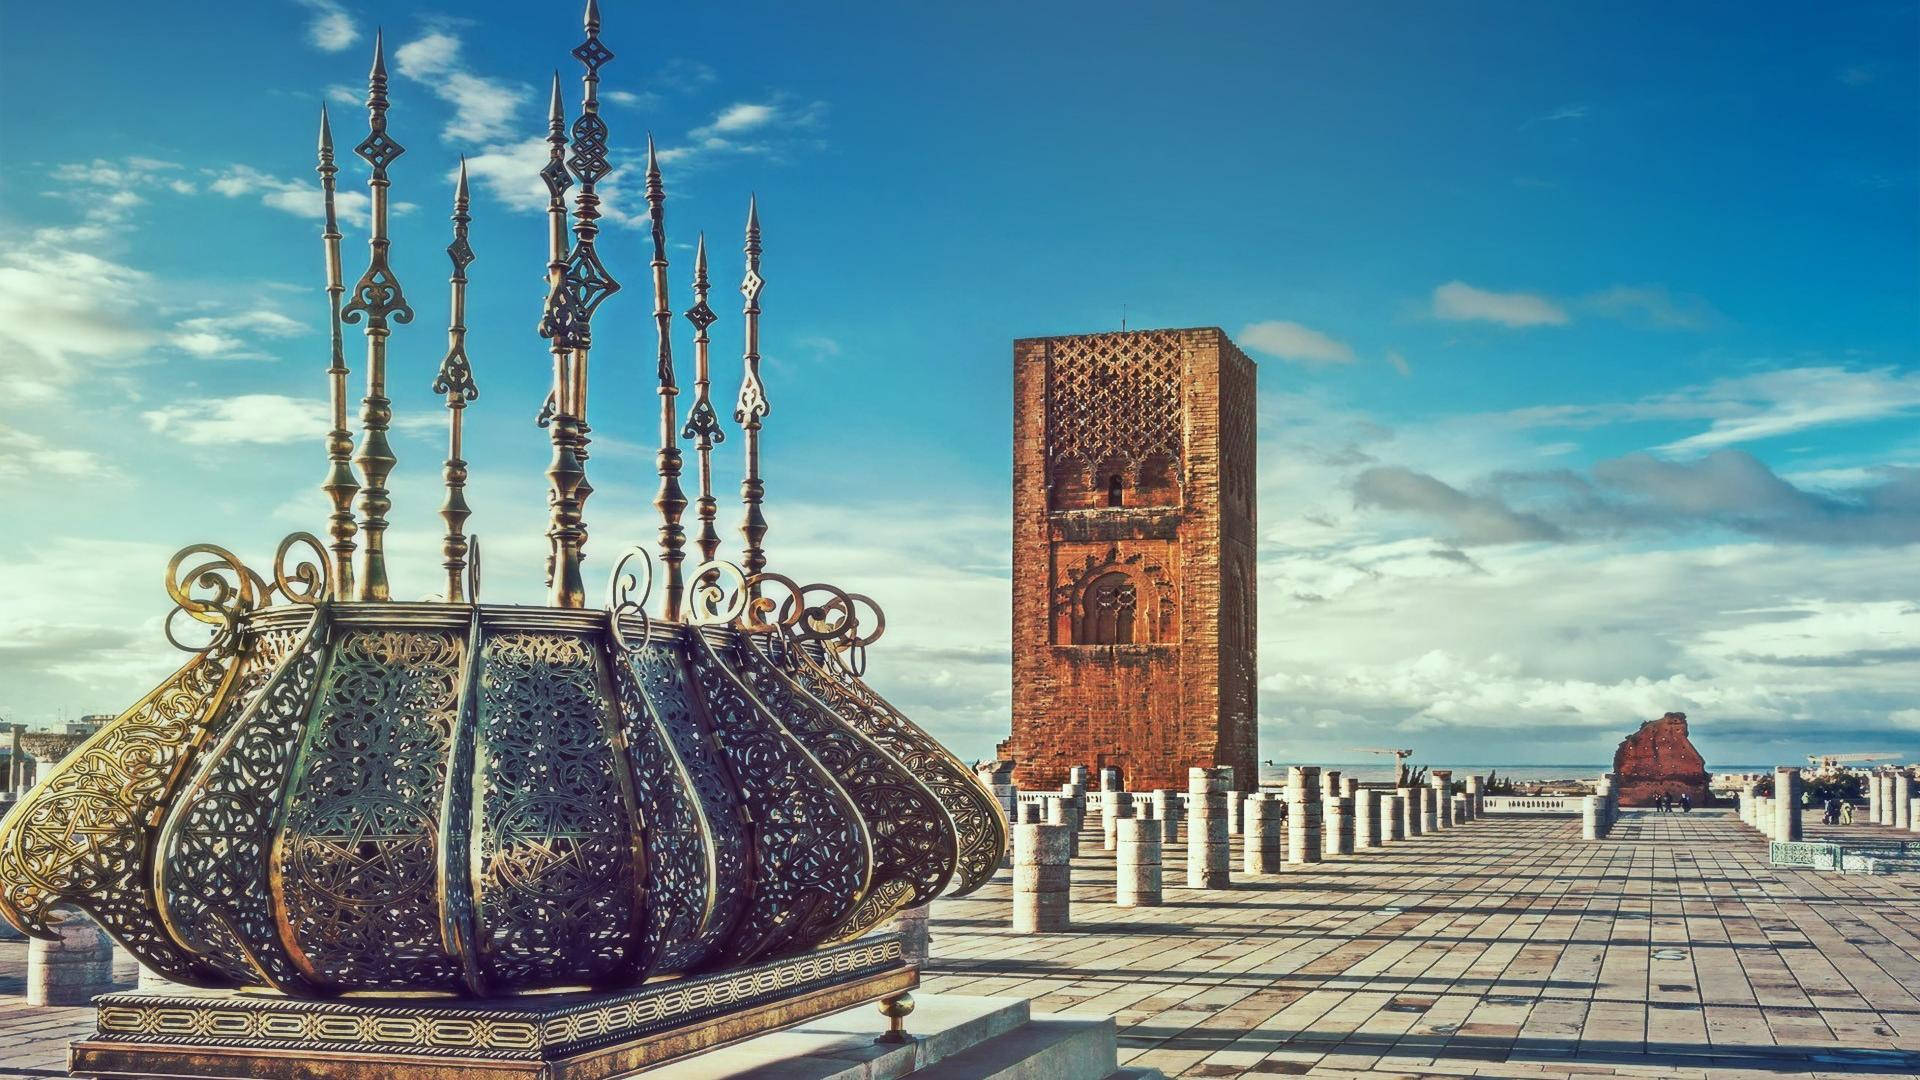 Hassan Tower In Morocco